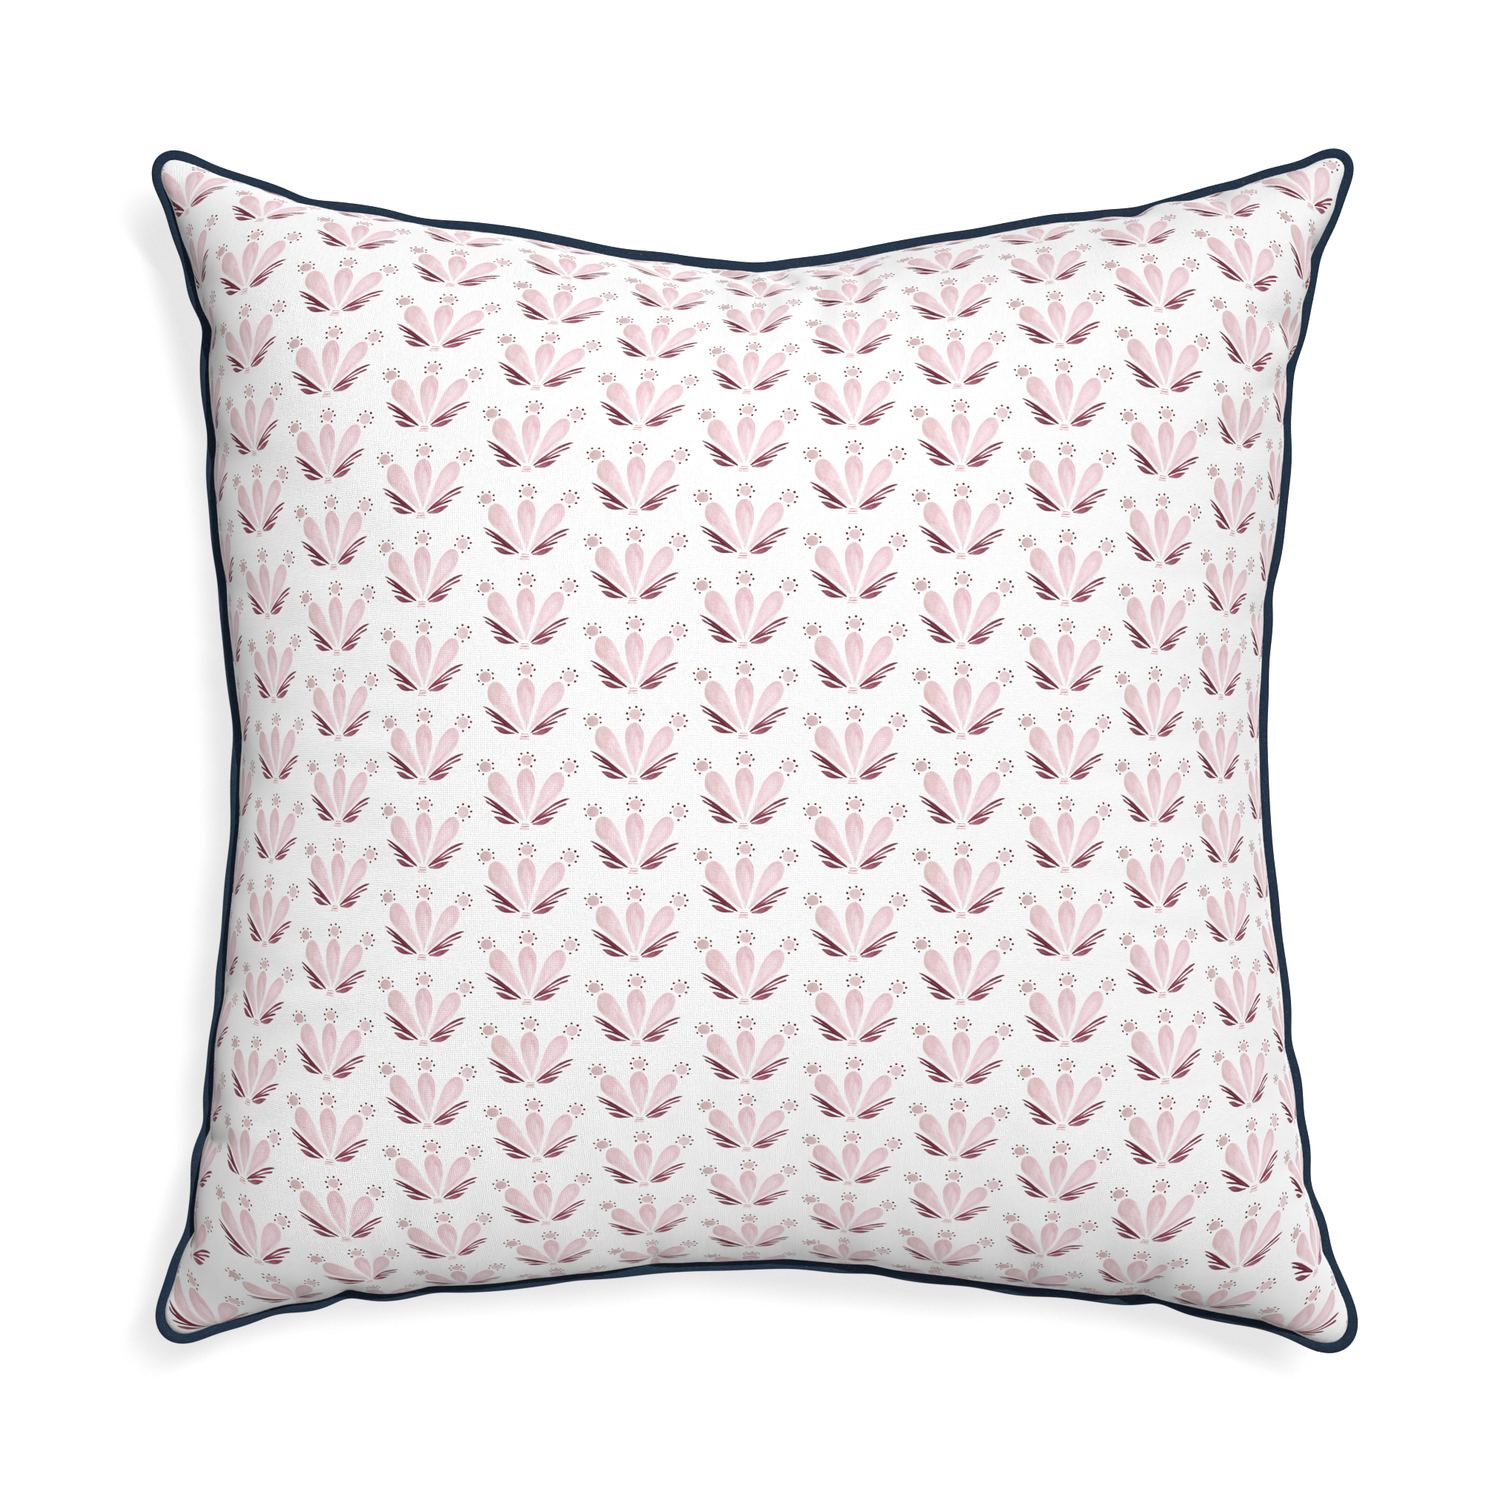 Euro-sham serena pink custom pink & burgundy drop repeat floralpillow with c piping on white background